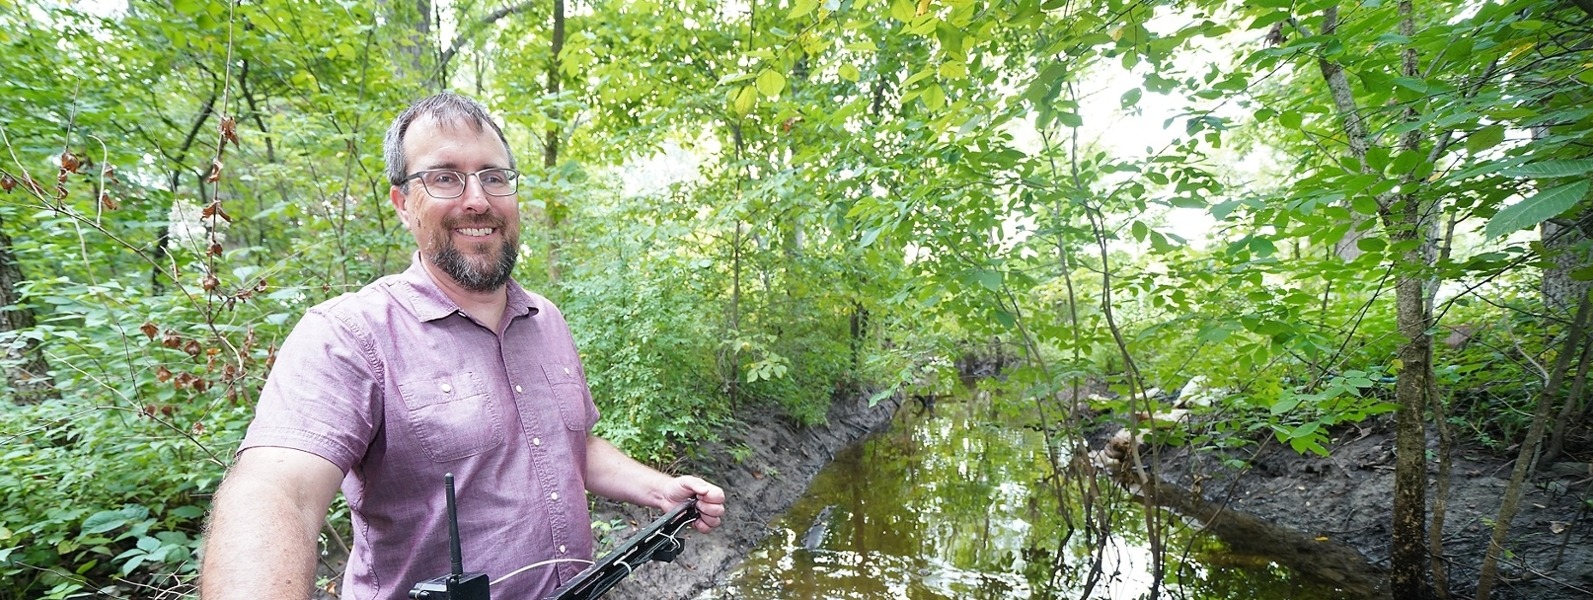 Keith Cherkauer stands in a body of water at the wetlands owned by Purdue University.